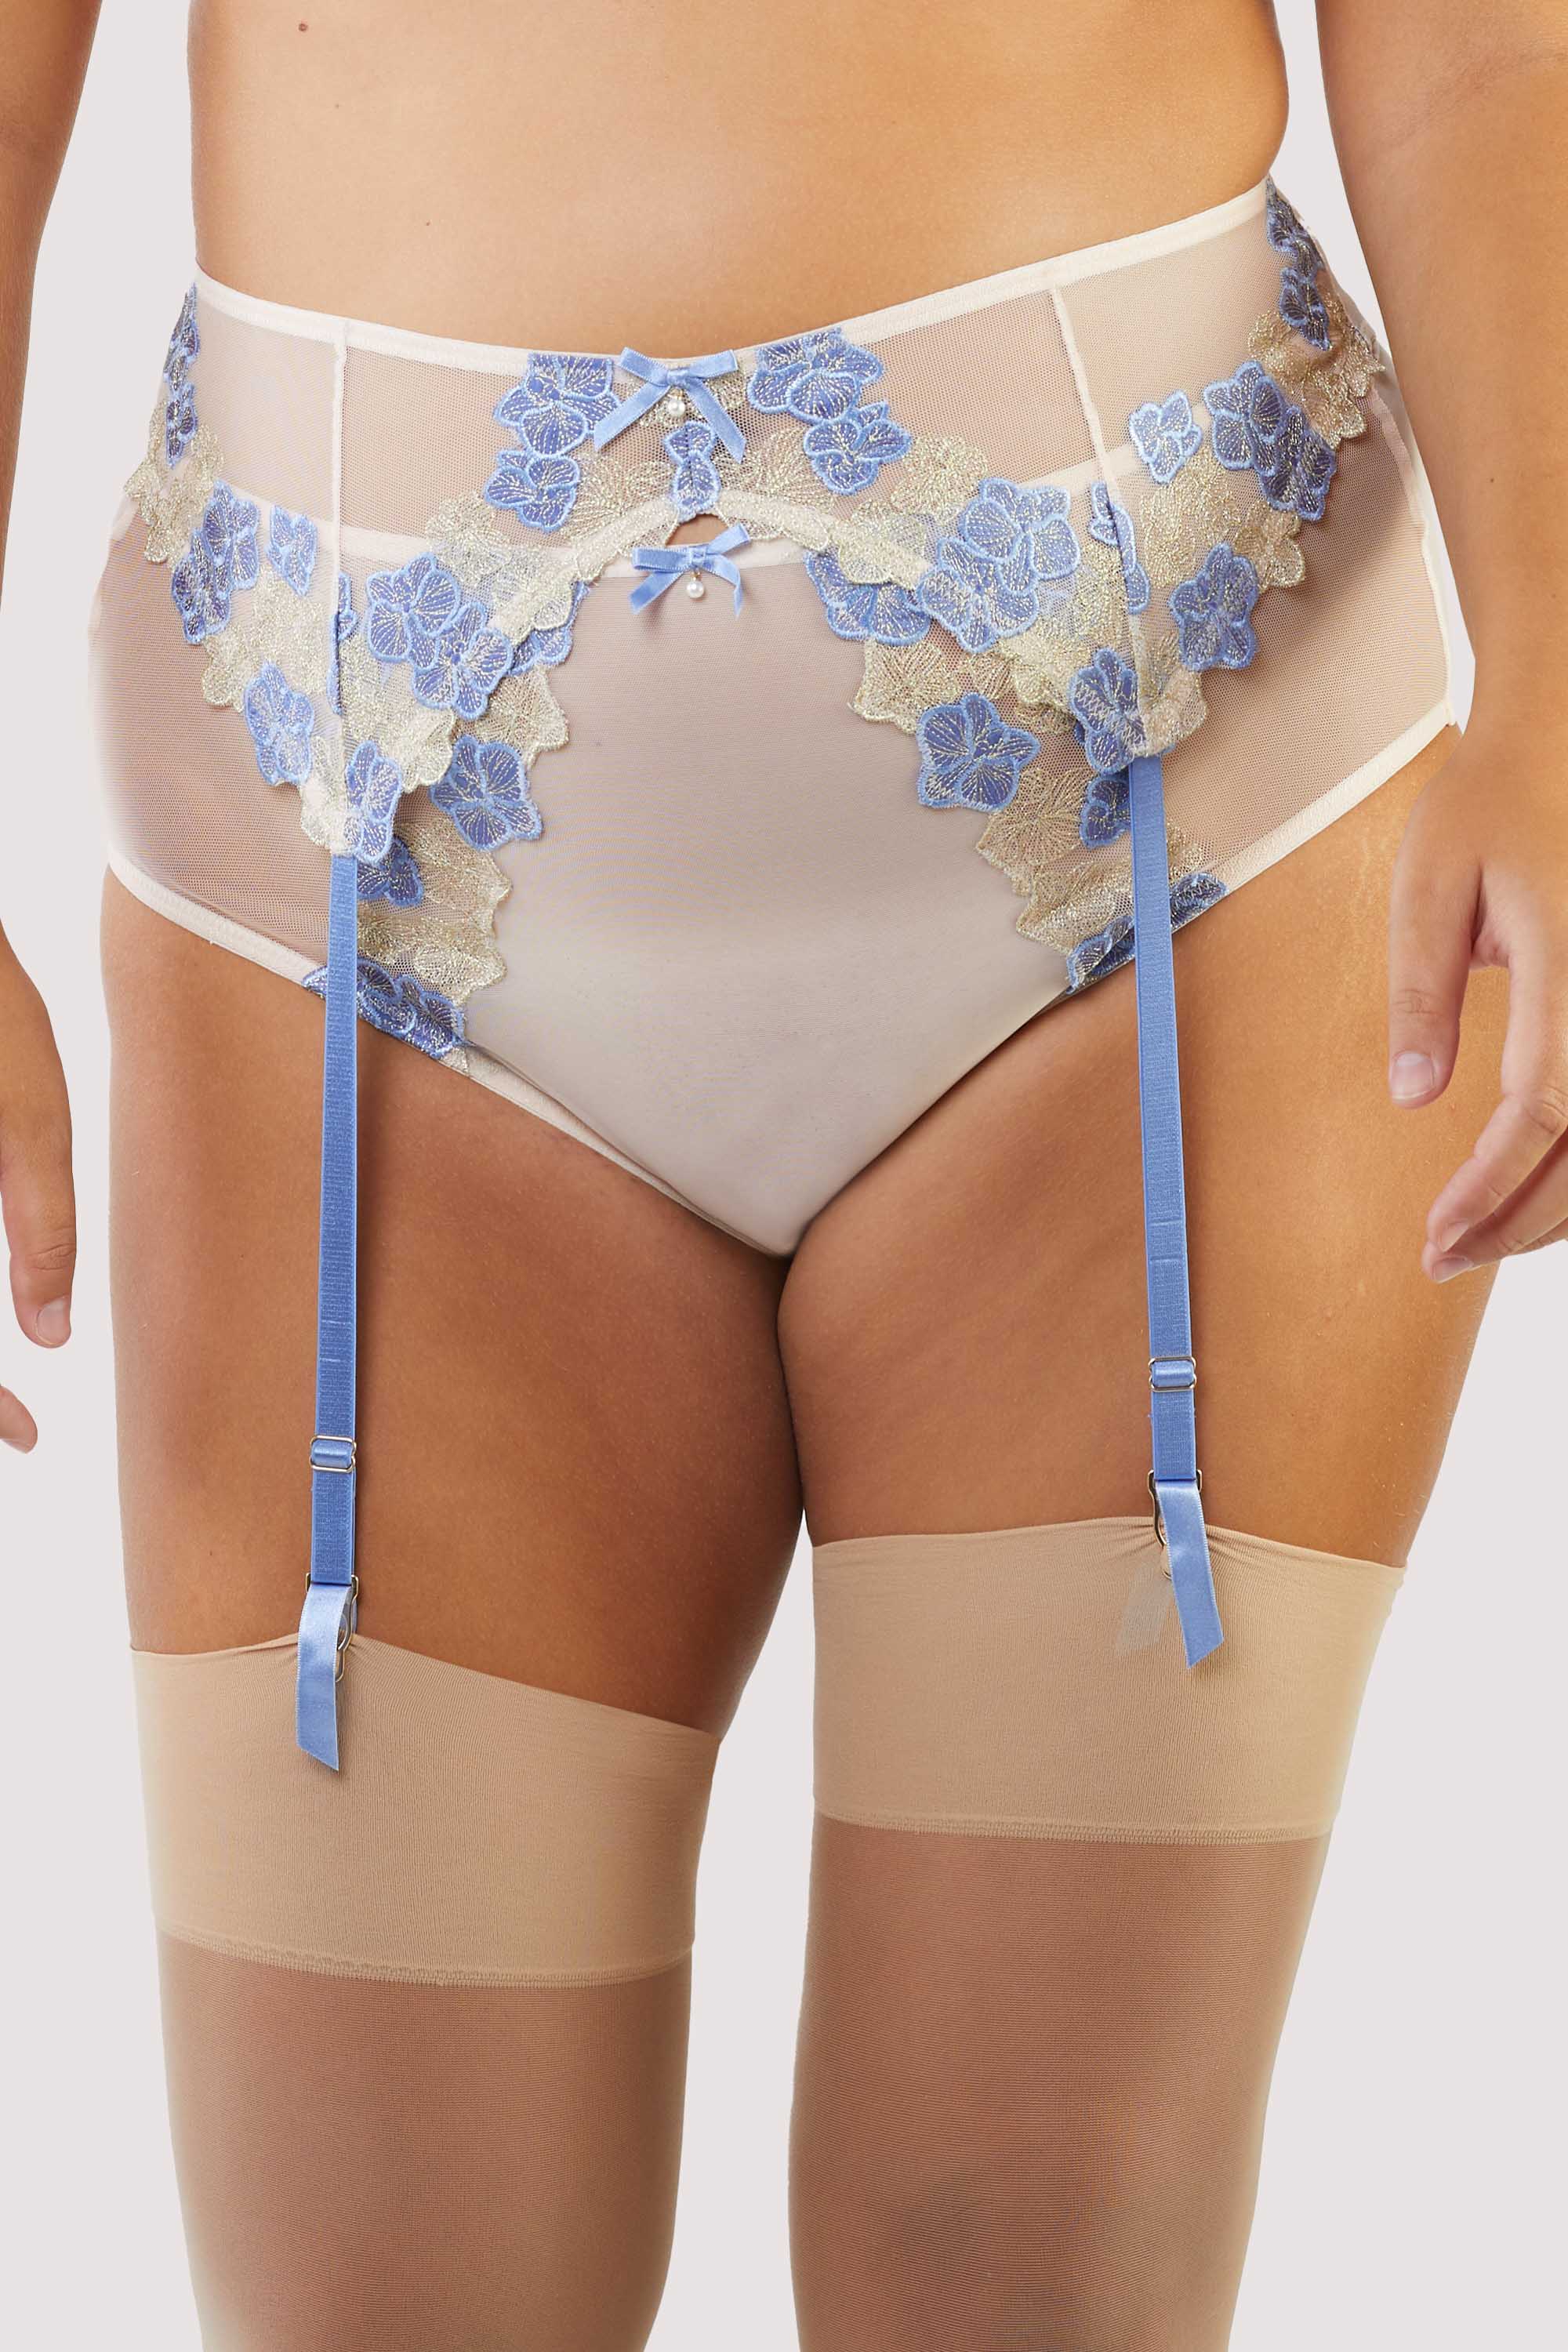 LissKiss Bright Blue With Matching Silicon Garter - Stay - Up